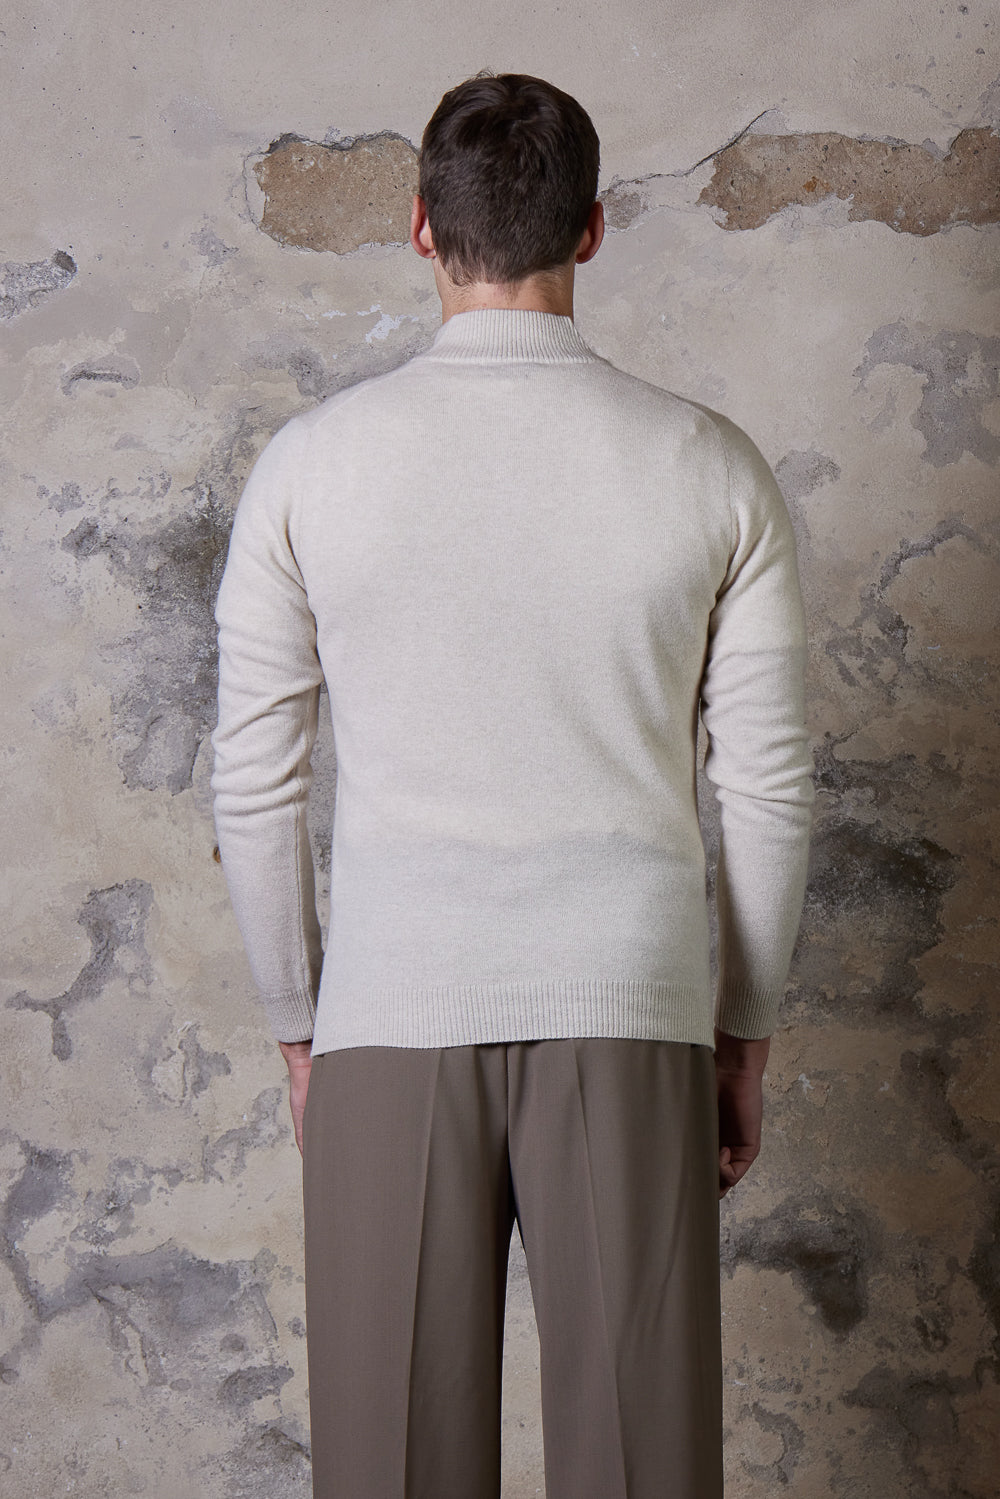 Buy the Daniele Fiesoli Half Zip Italian Wool Sweatshirt in Cream at Intro. Spend £50 for free UK delivery. Official stockists. We ship worldwide.